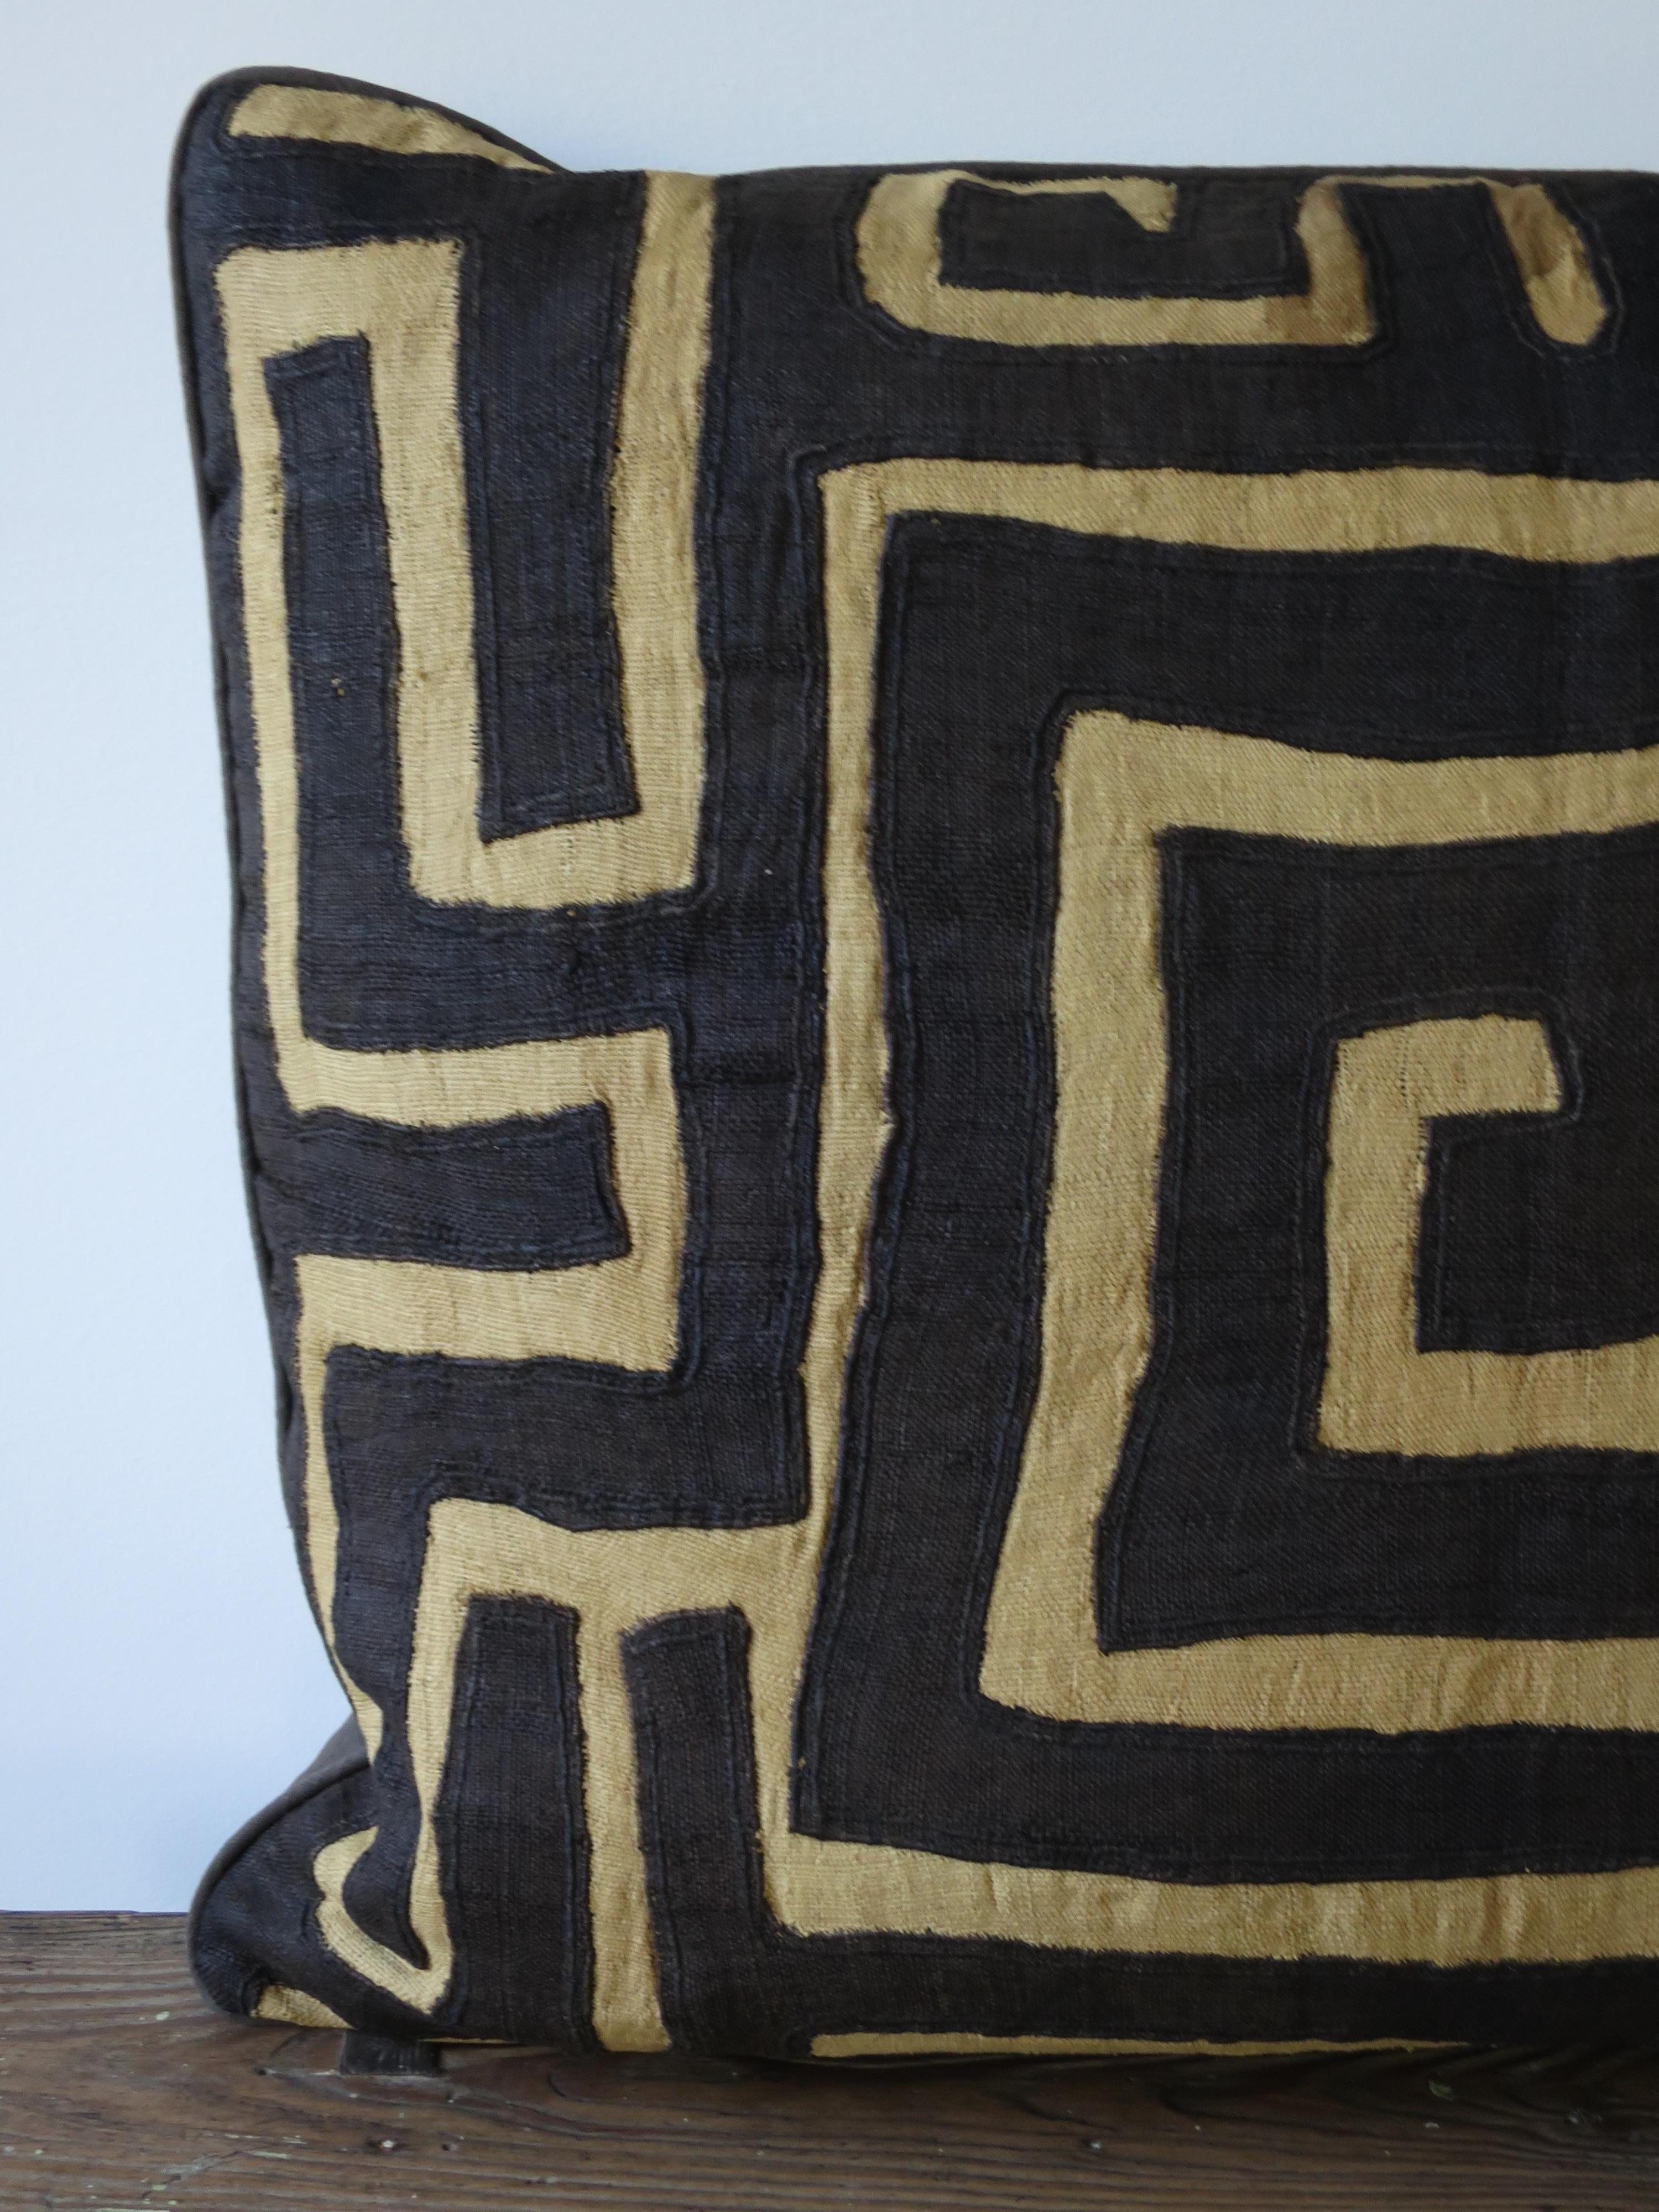 Antique Kuba cloth backed in linen, with all down stuffing pillow.
Originally came from a long panel of raffia cloth of 8 segments stitched together to make a ceremonial skirt. This one has a strong graphic presence with a Greek key at the center.